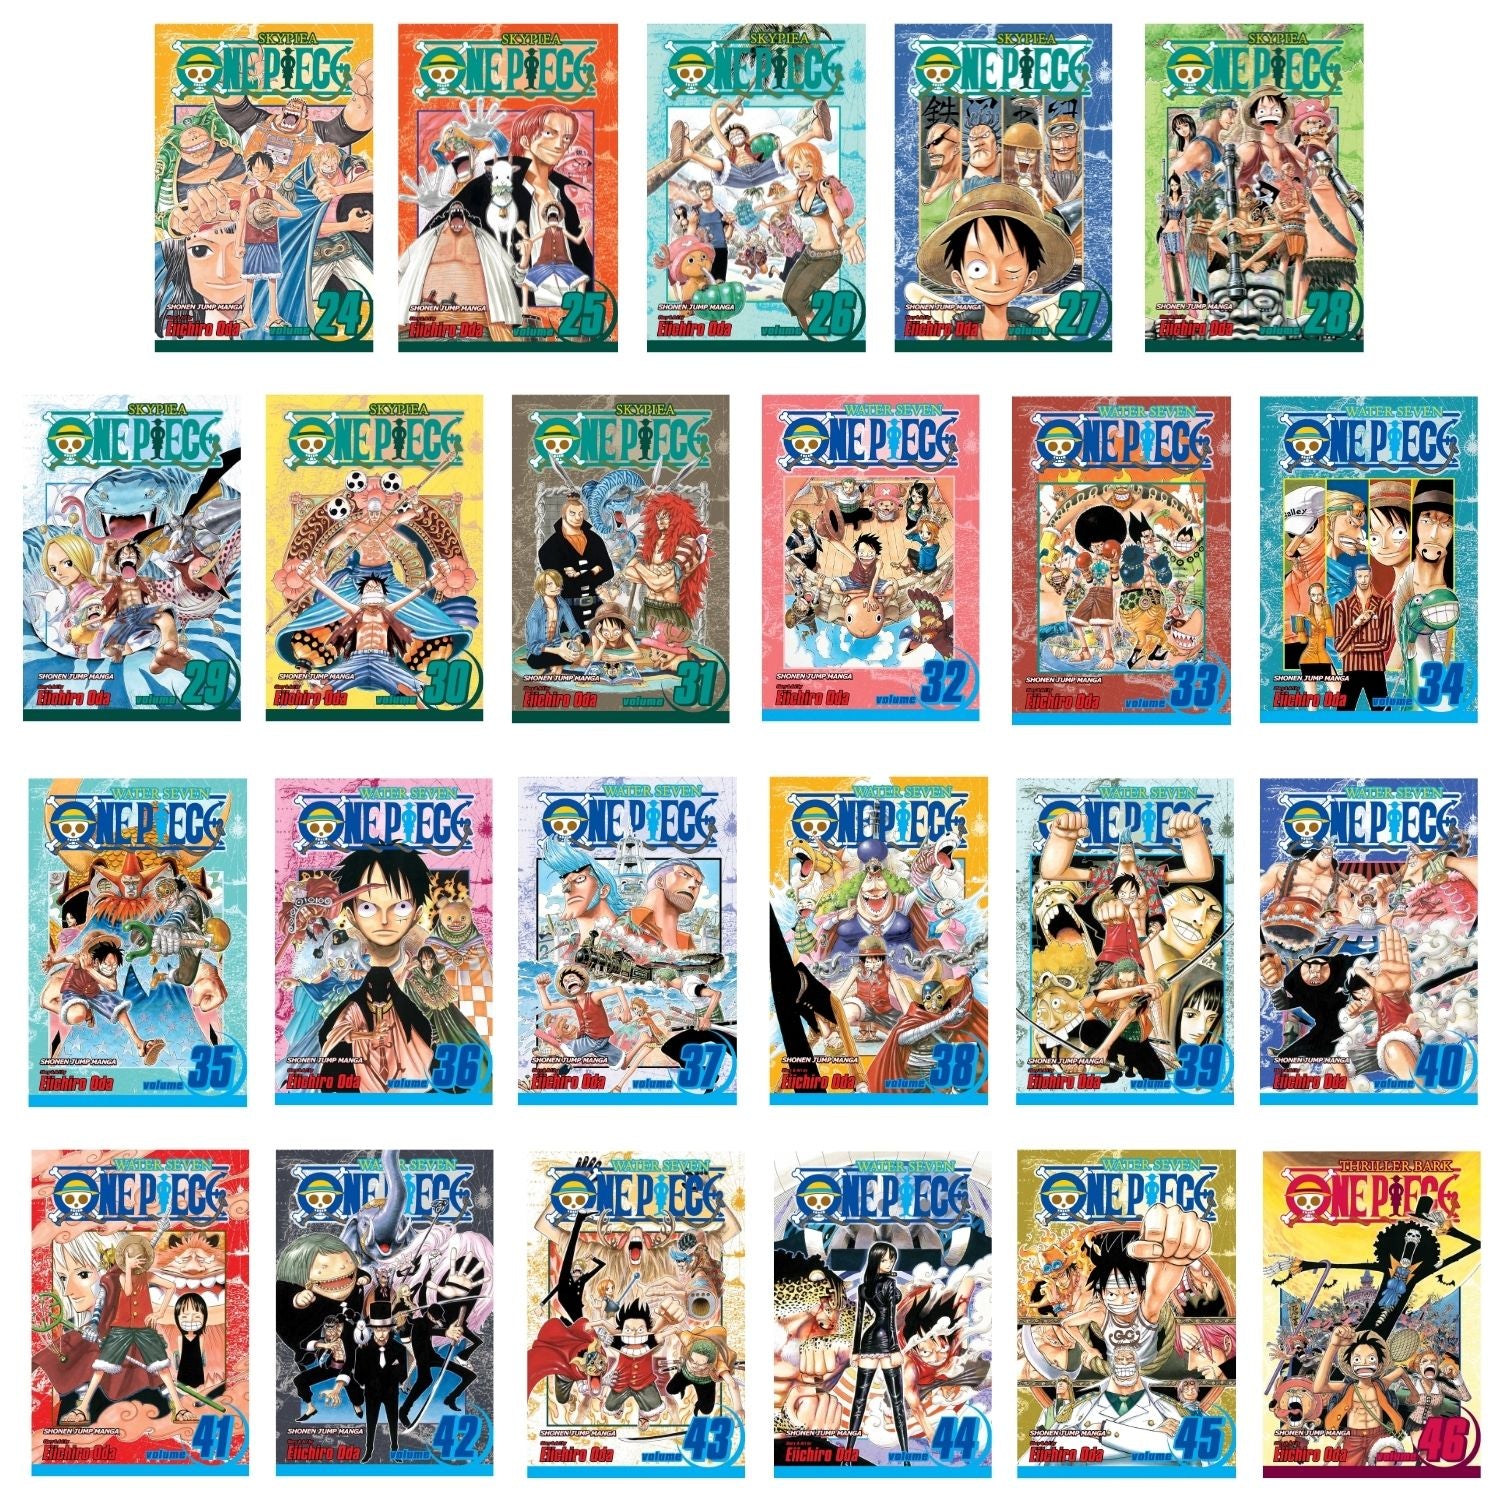 /wp-content/uploads/one-piece-volumes.